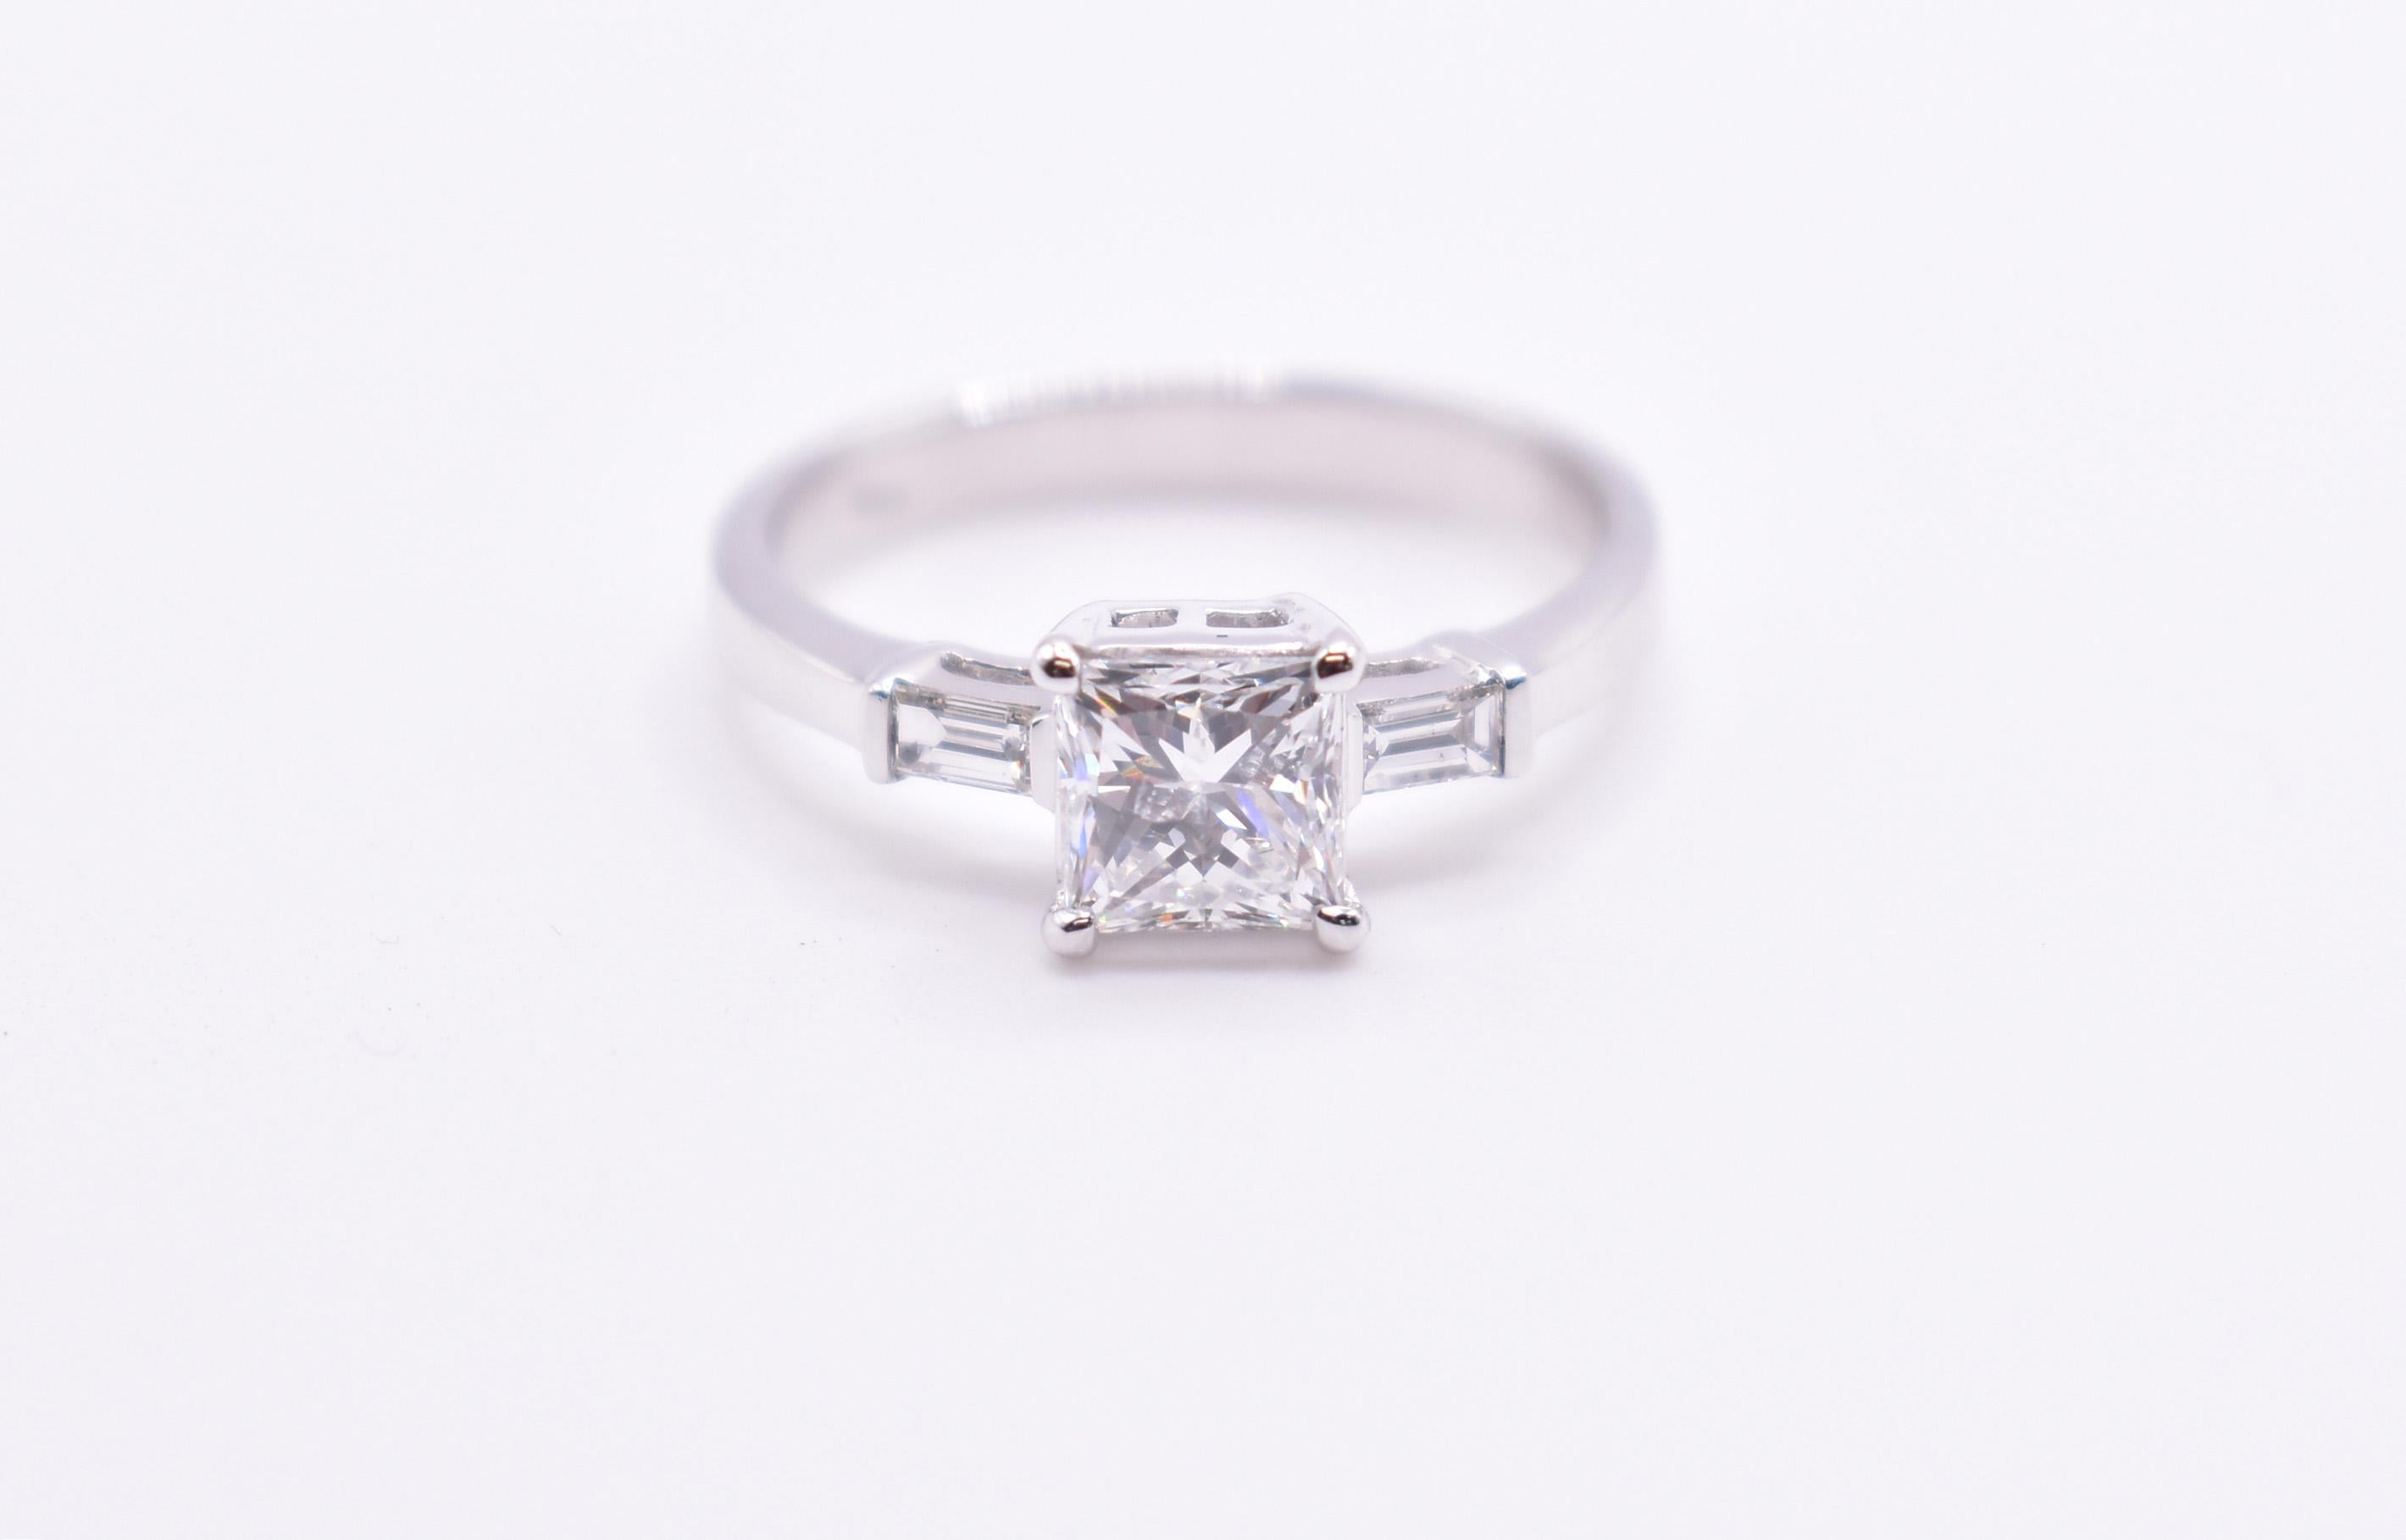 On offer for sale is a splendid 18k white gold 1ct princess cut diamond engagement ring, having a princess cut diamond to the centre, with baguette cut diamonds on either side.

1 x 1.01ct princess cut diamond
2 x 014ct baguette cut diamonds
SI 2